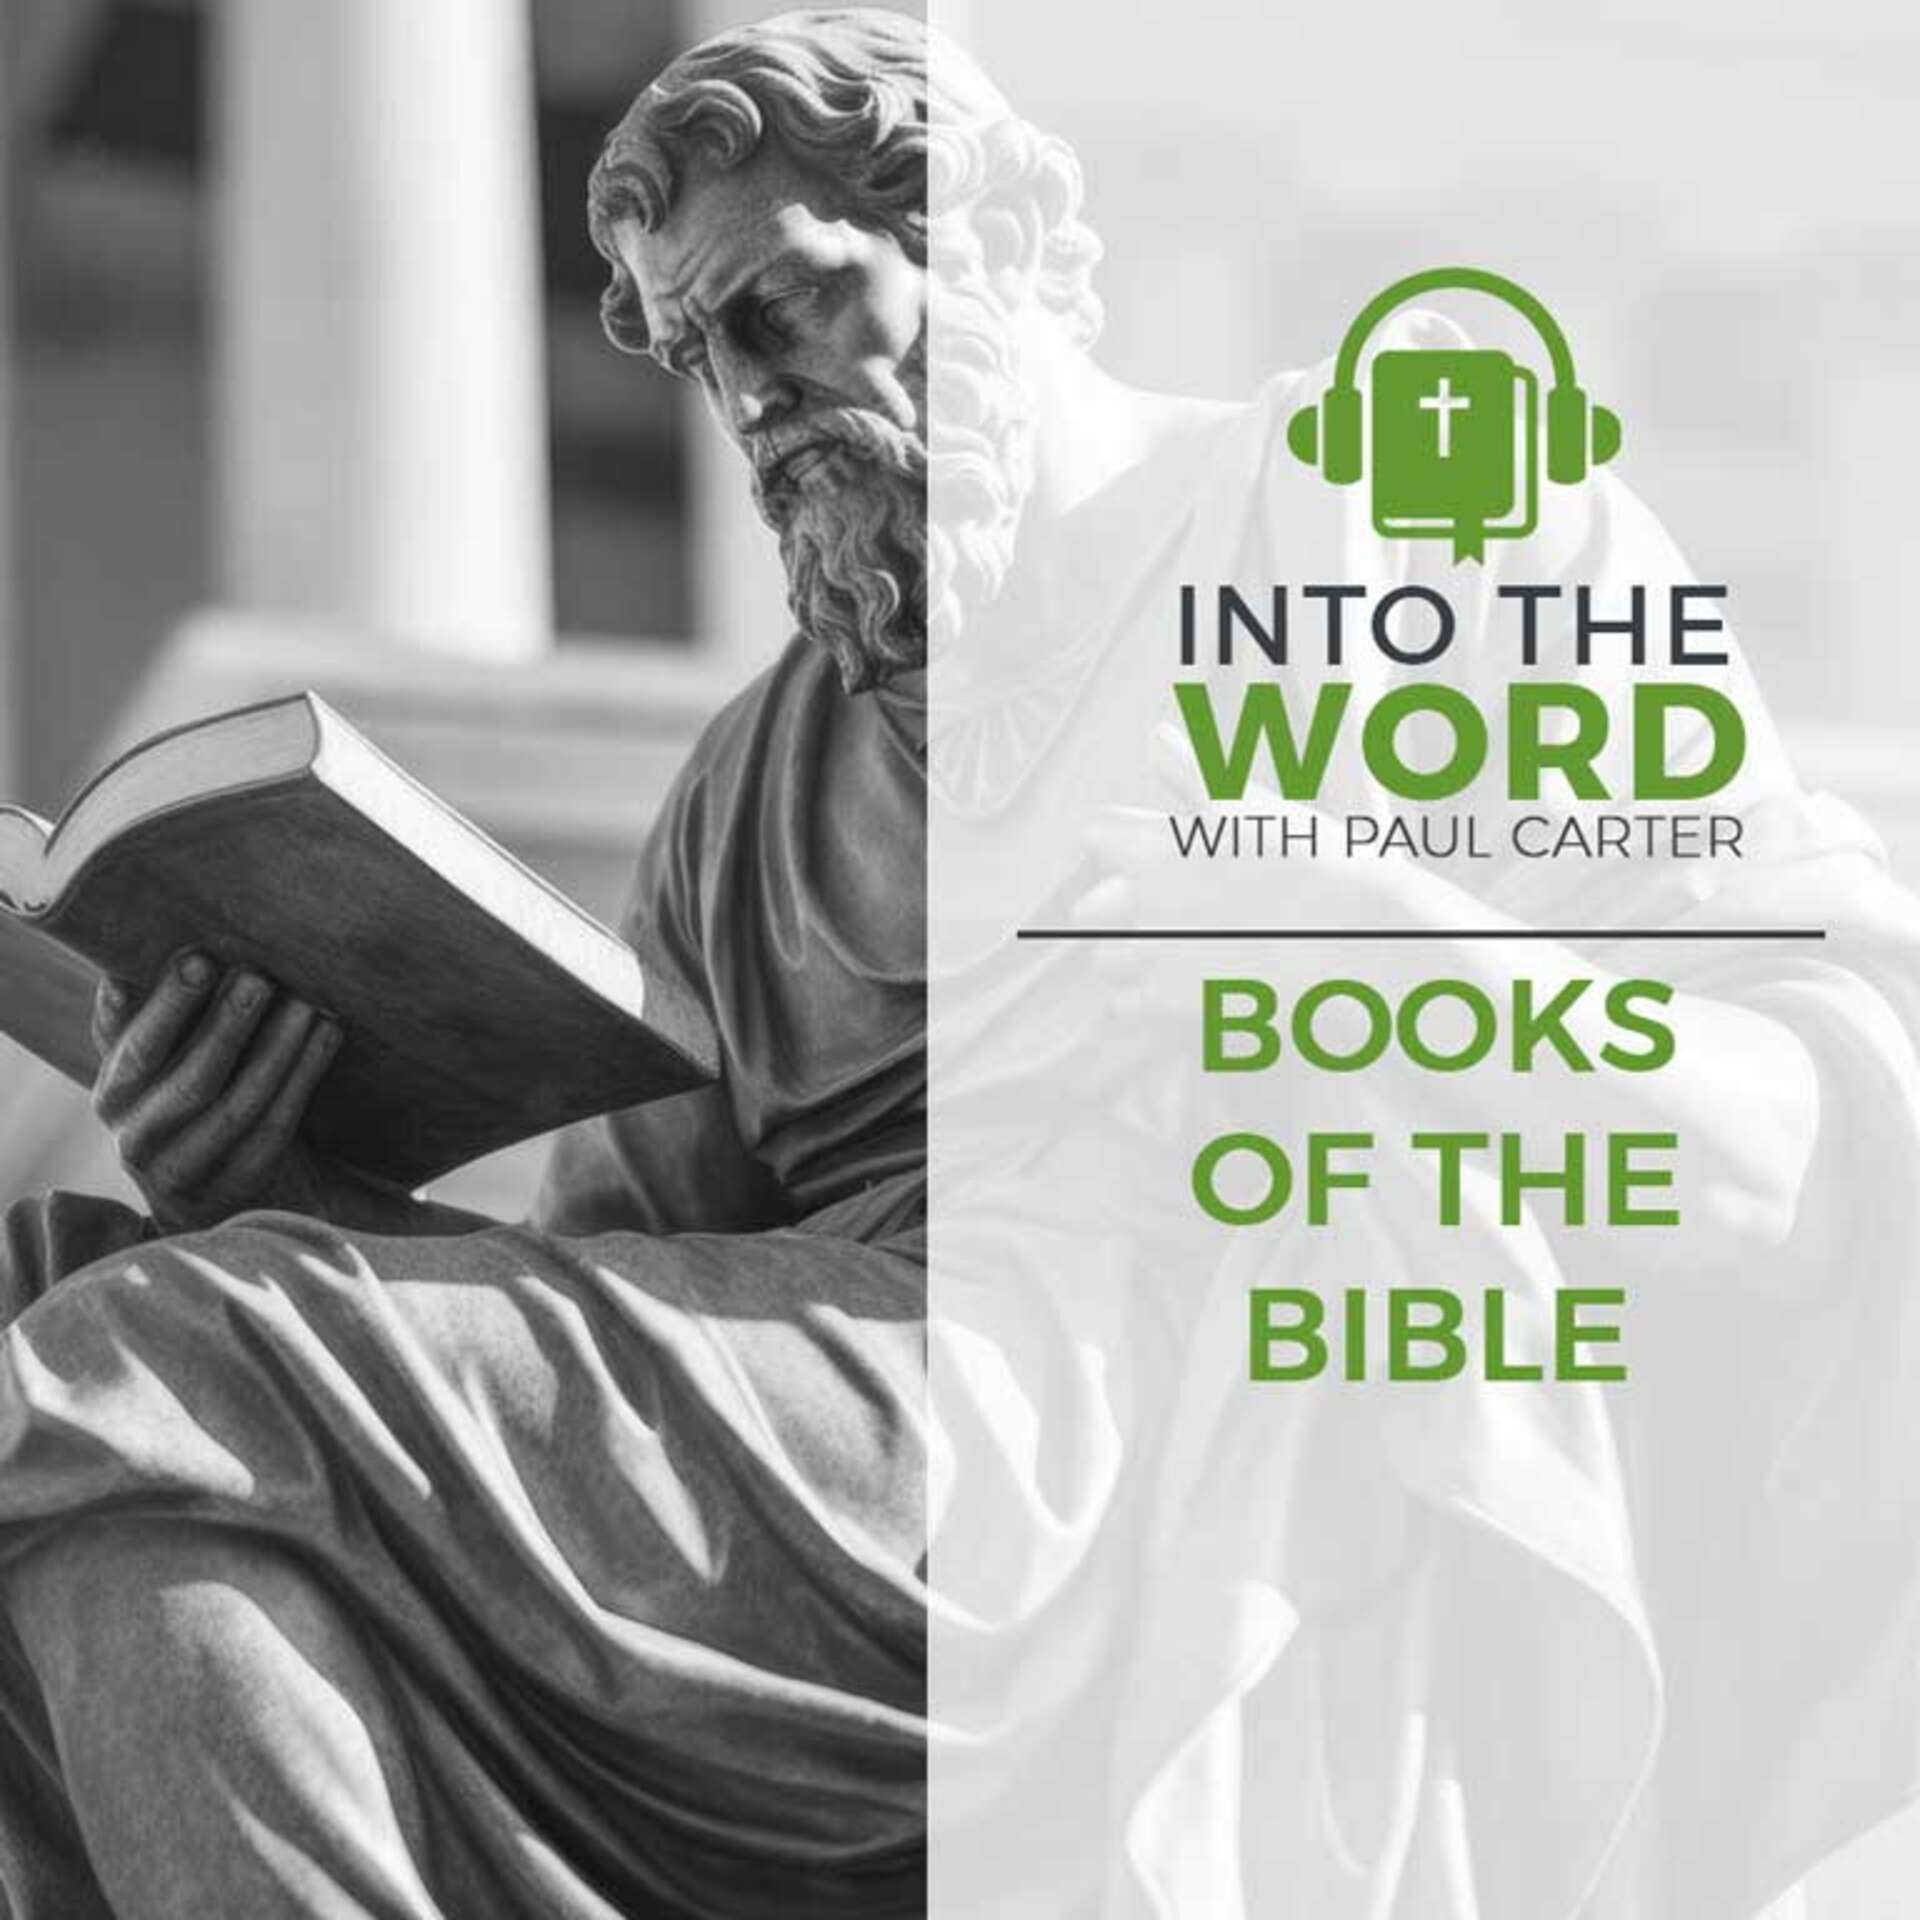 Books of the Bible with Into the Word and Paul Carter